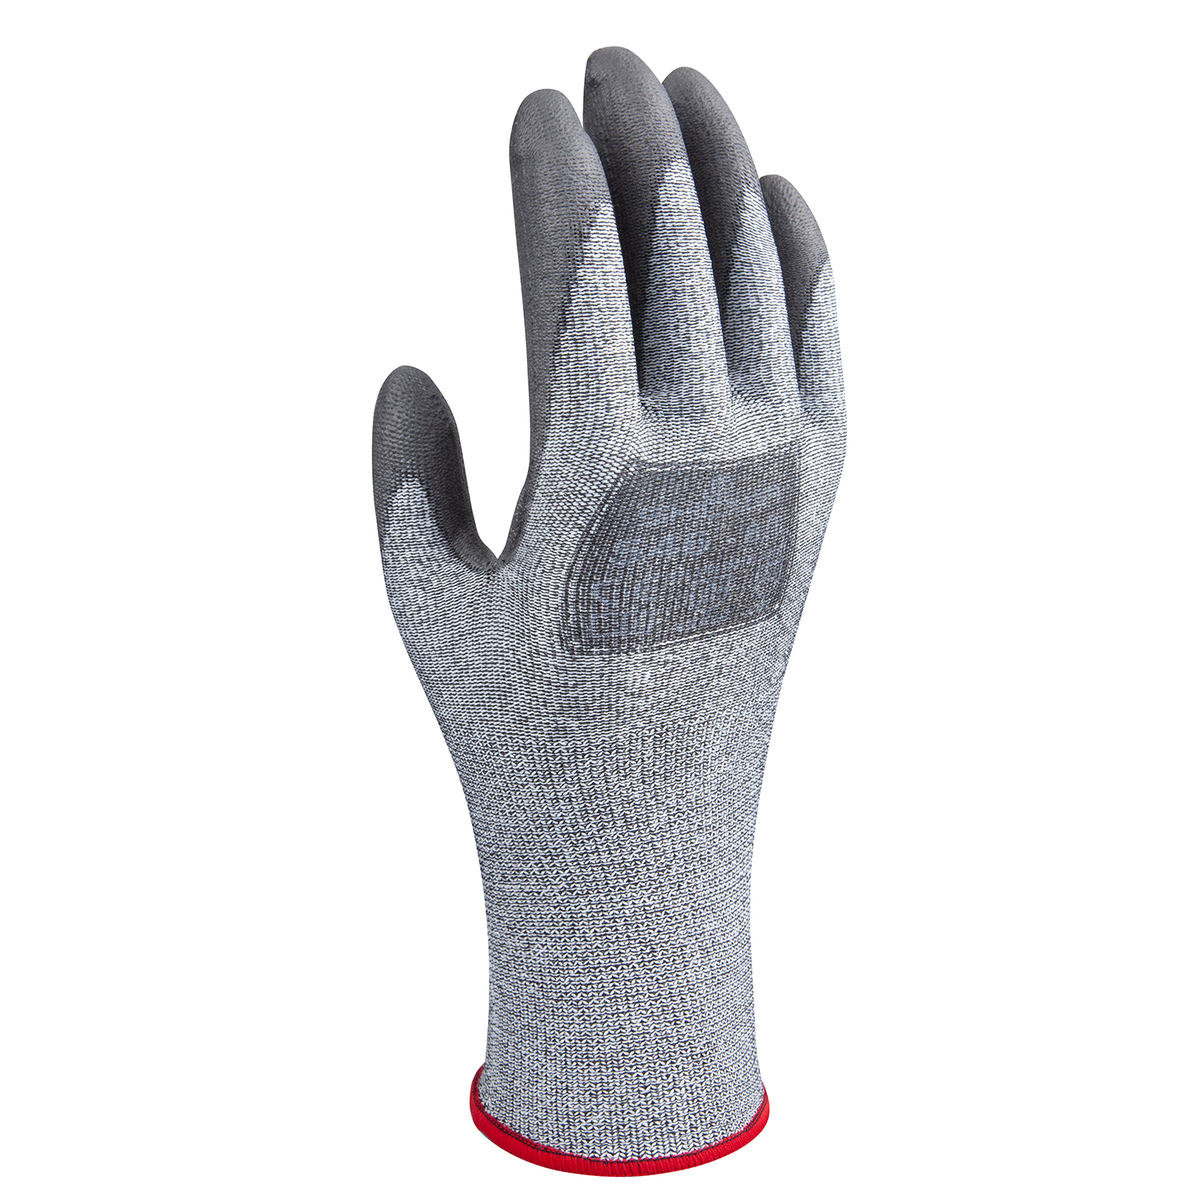 Cut Resistant Gloves for Sale online at autumn supply